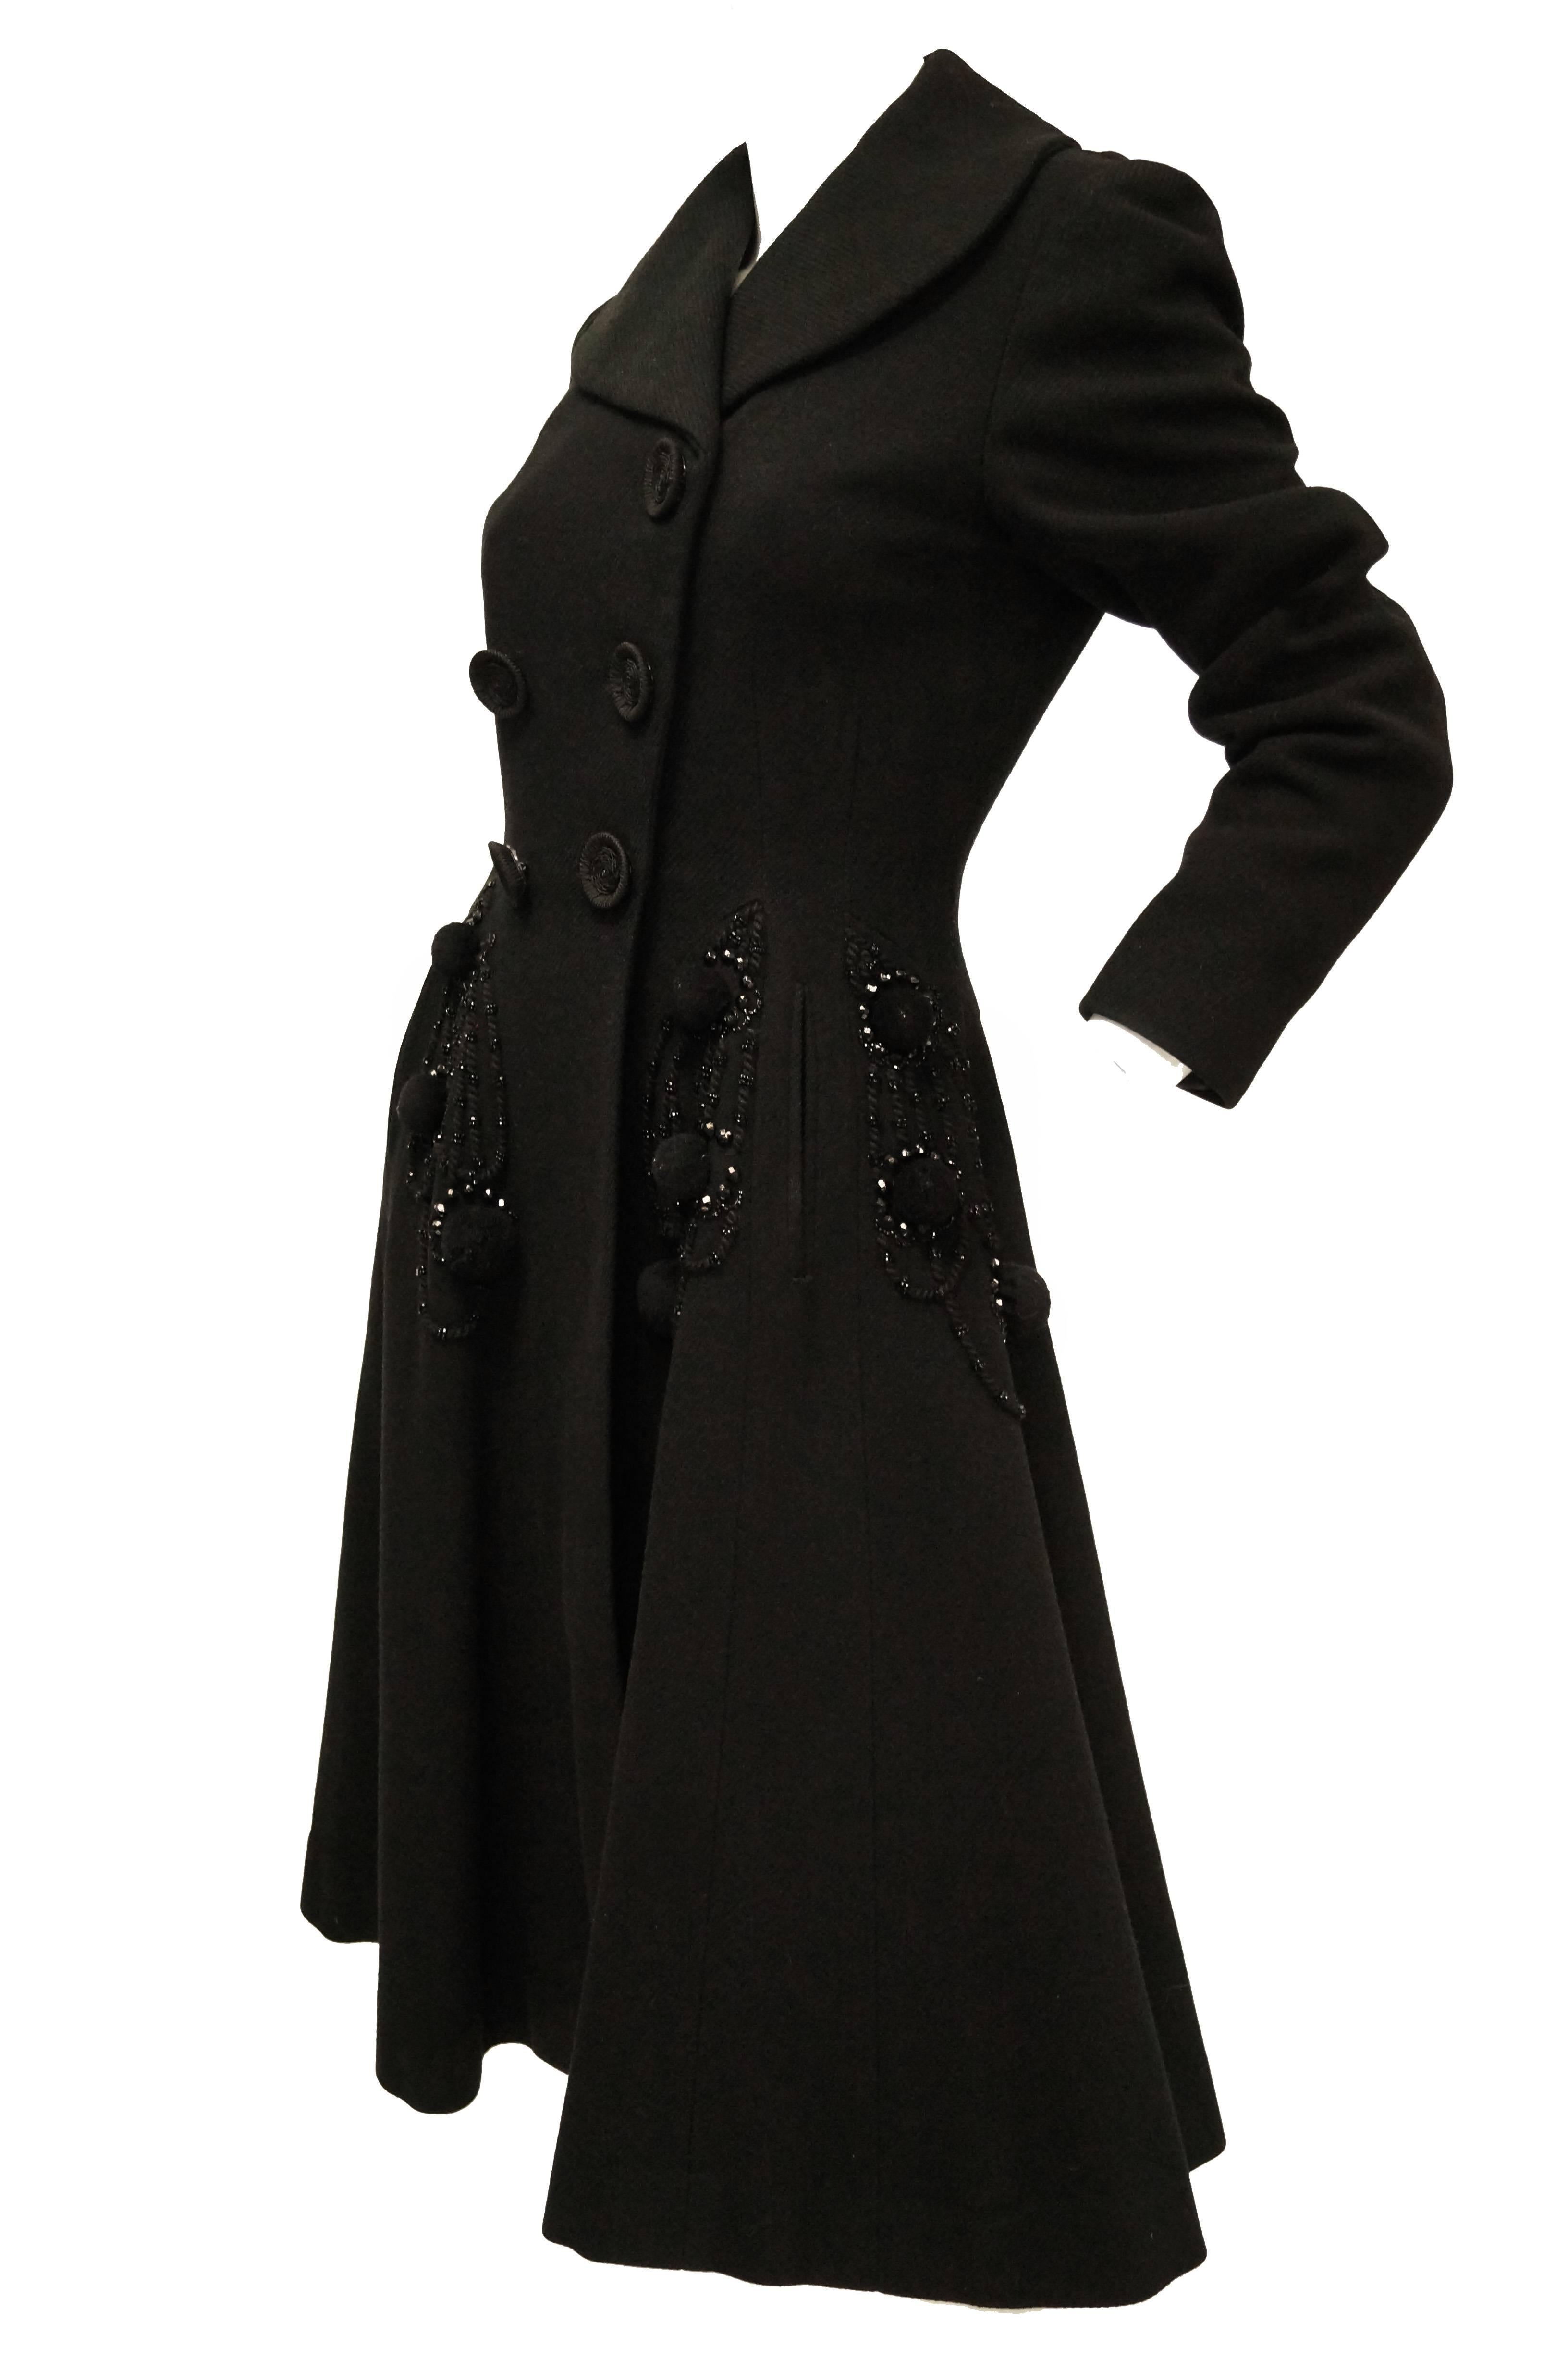 Absolutely gorgeous! This black wool coat by Agnes - Drecoll hits just below the knee and has a fit and flare silhouette, giving the tea length dress a very feminine outline. The coat has a shawl - like collar, is double breasted and features